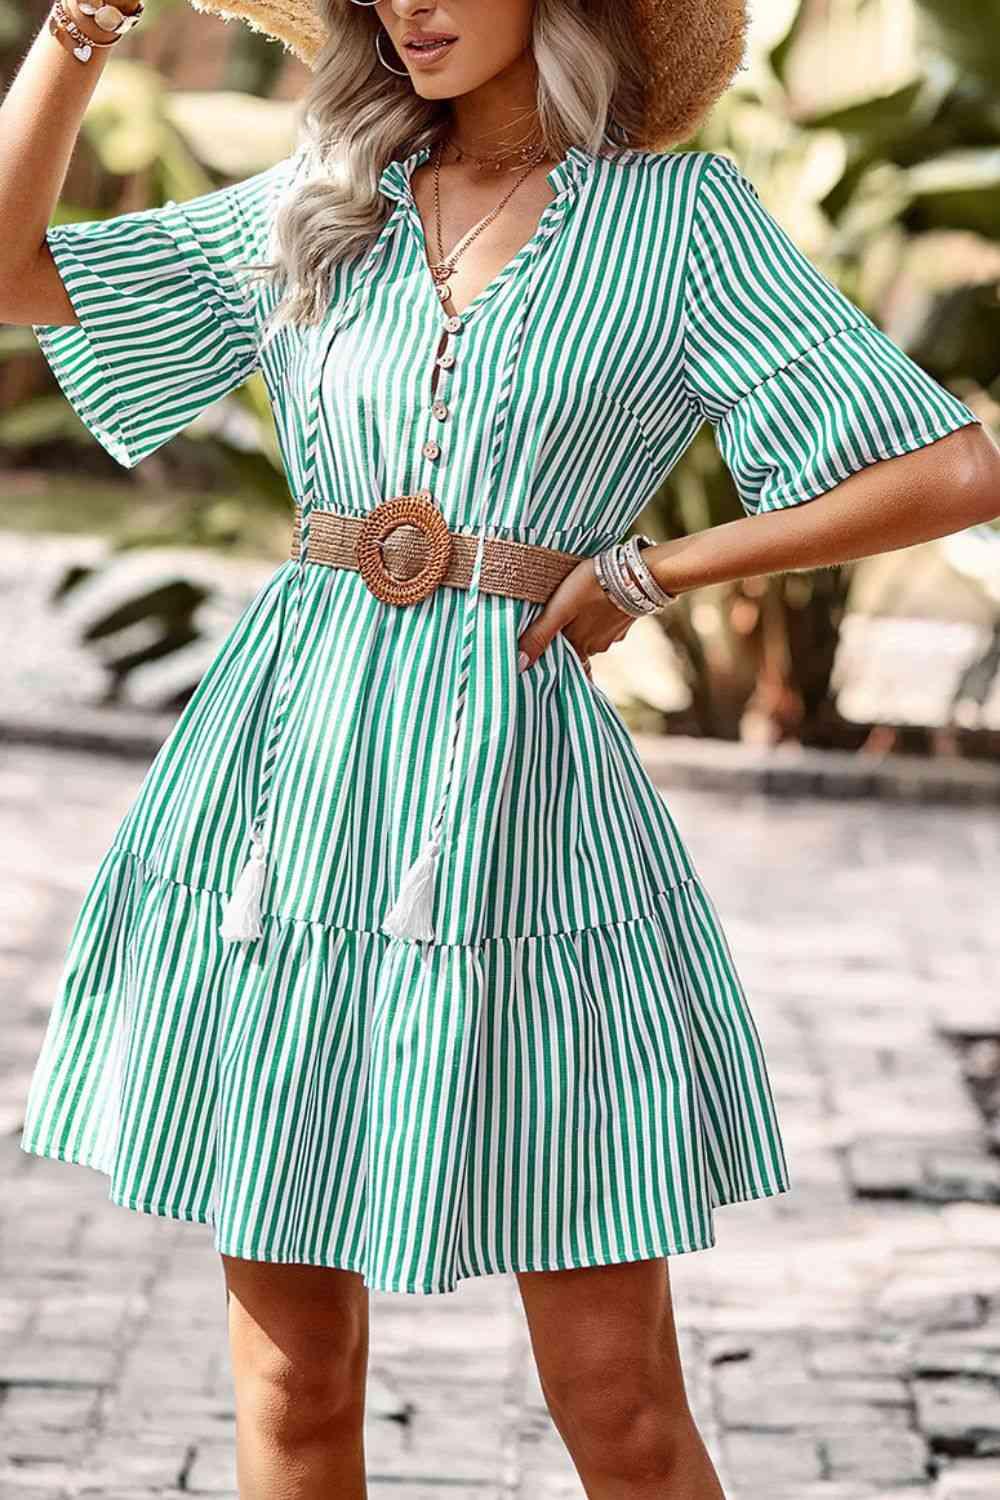 a woman wearing a green and white striped dress